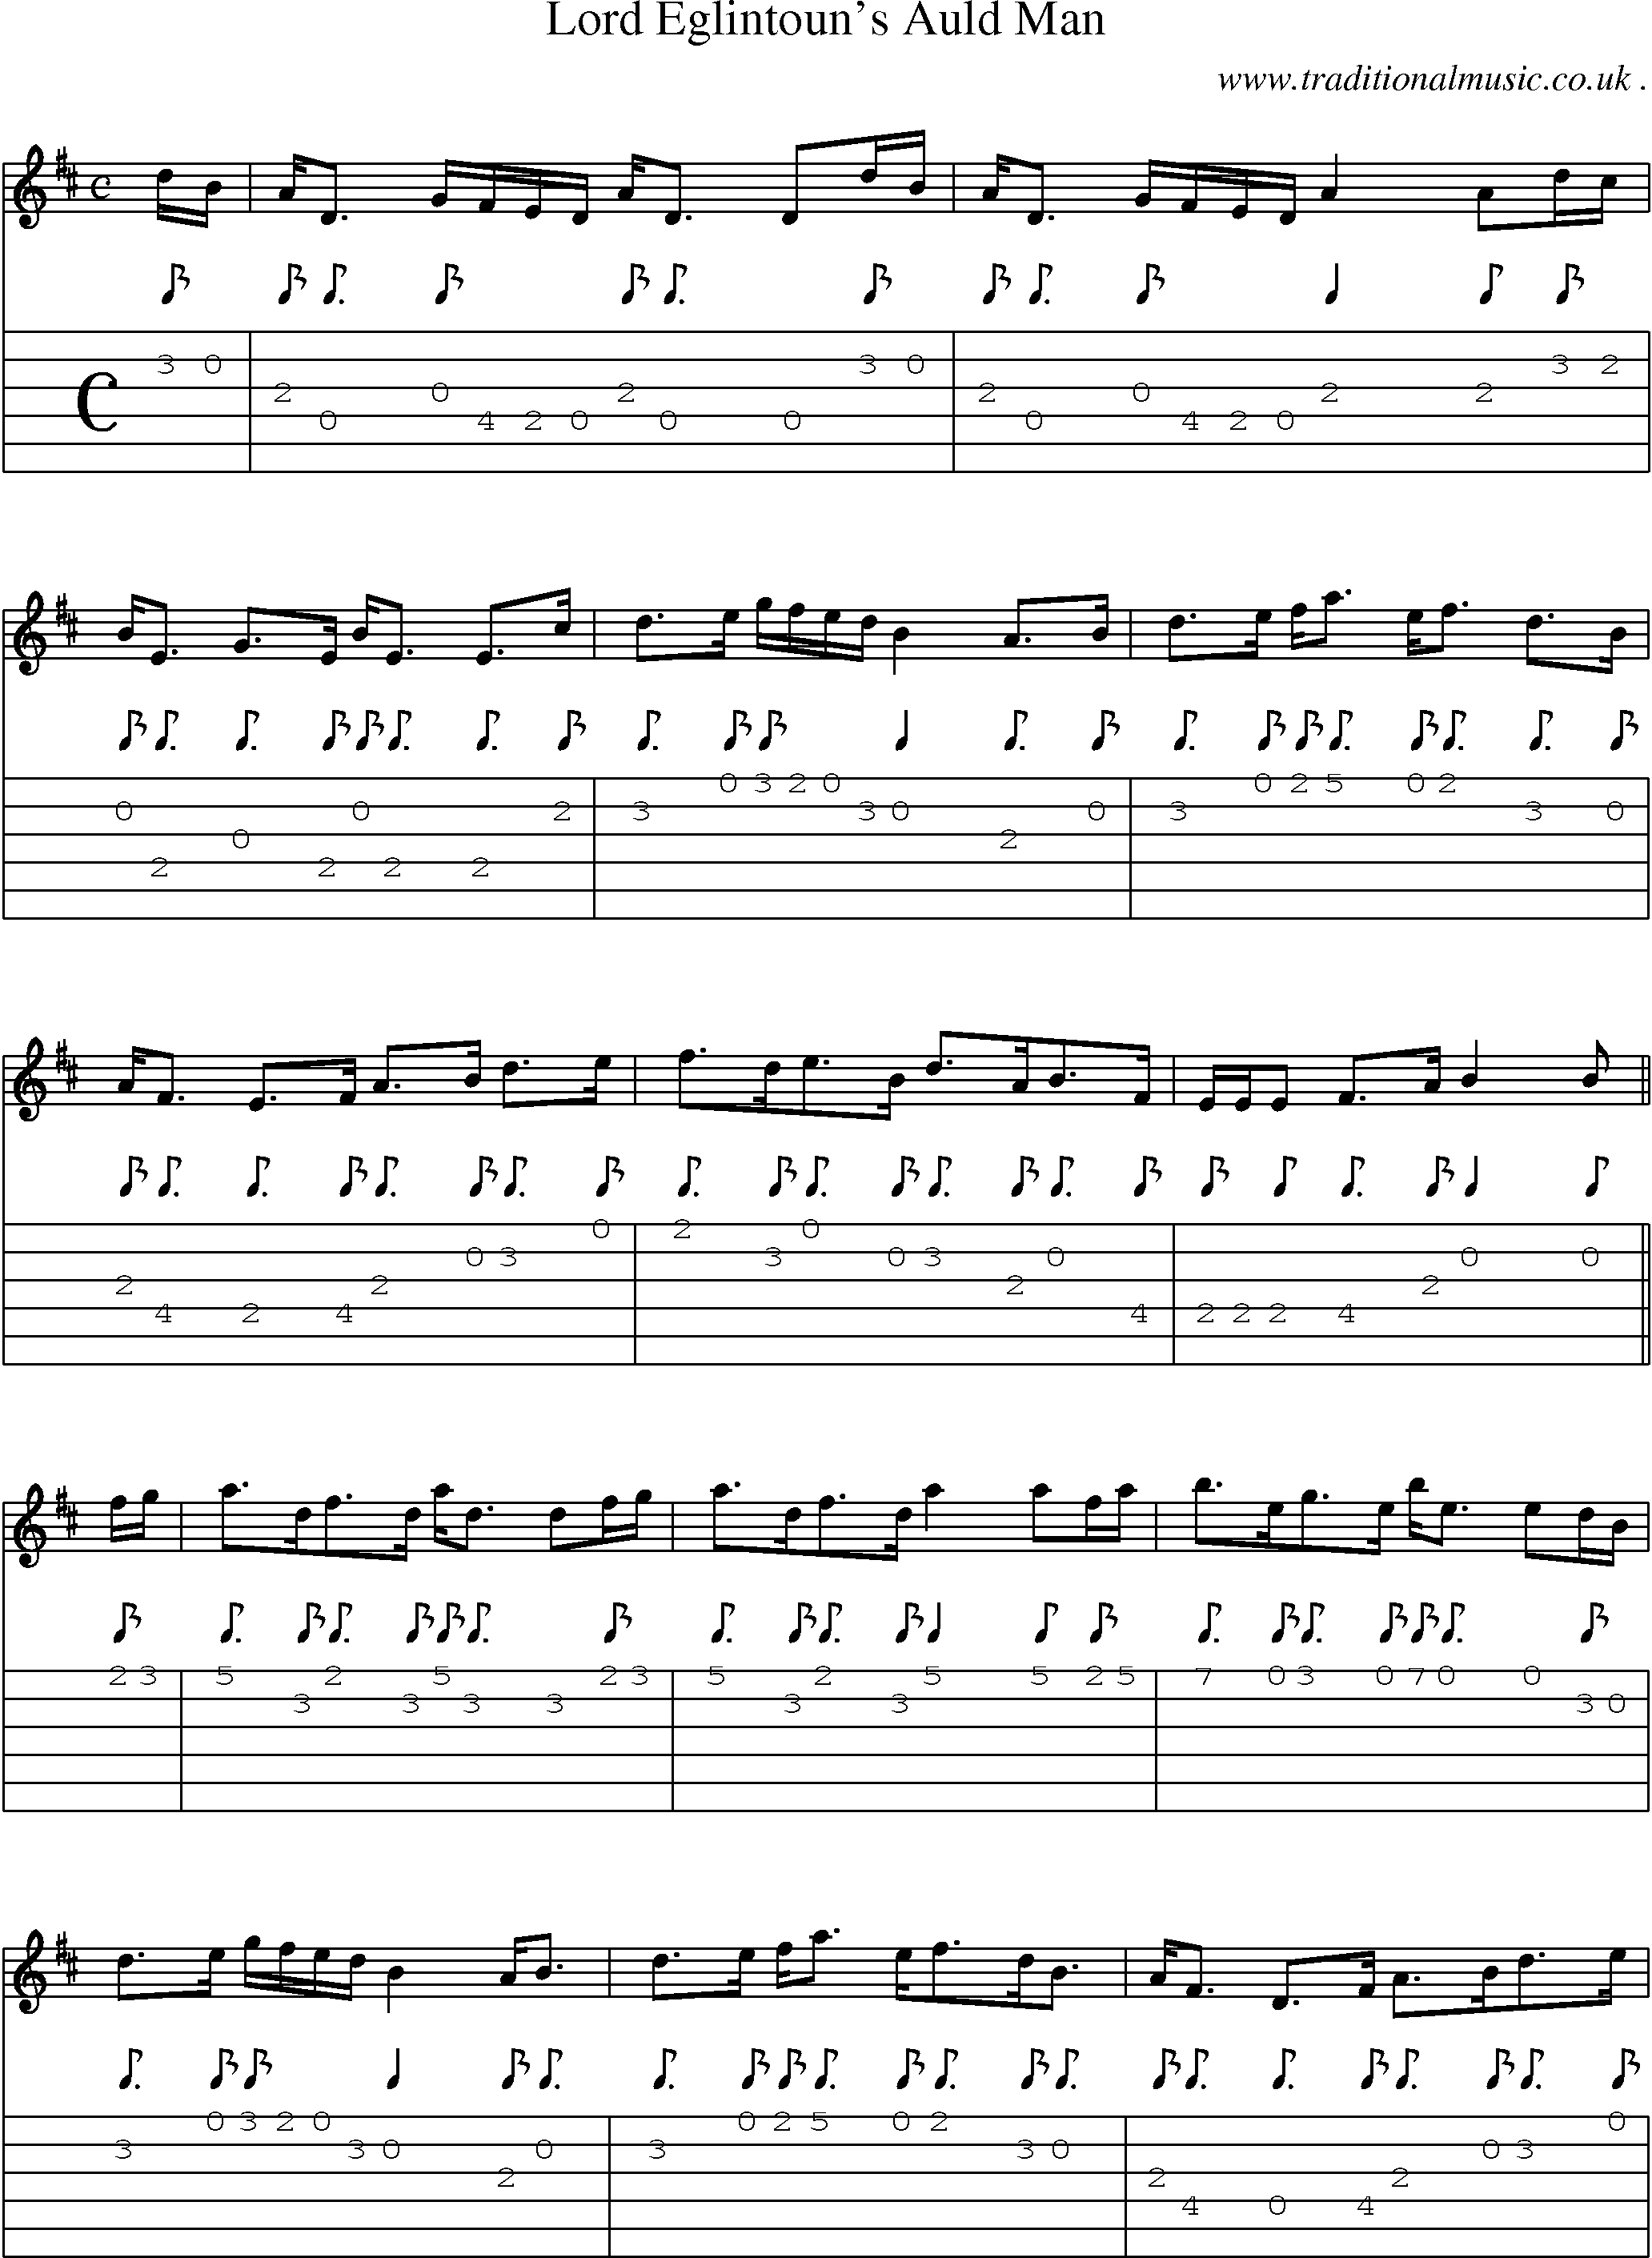 Sheet-music  score, Chords and Guitar Tabs for Lord Eglintouns Auld Man